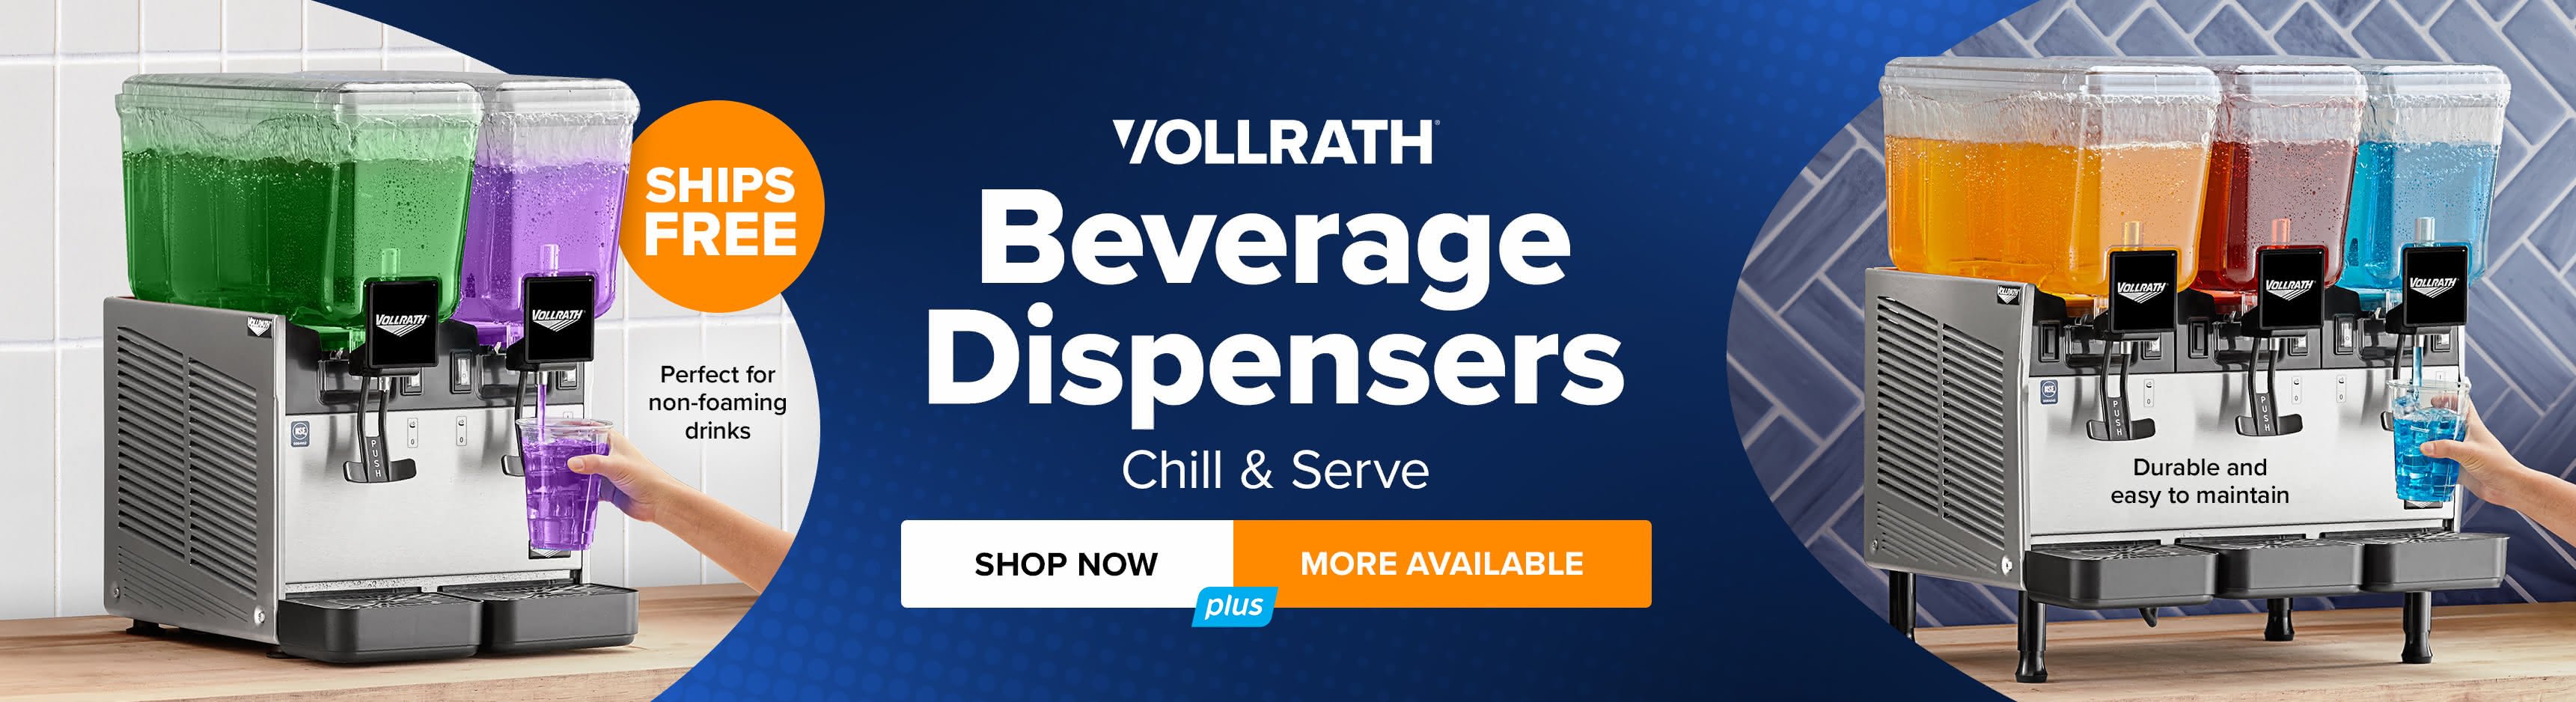 Vollrath Refrigerated Beverage Dispensers - Chill and Serve. Shop Now. More Available.